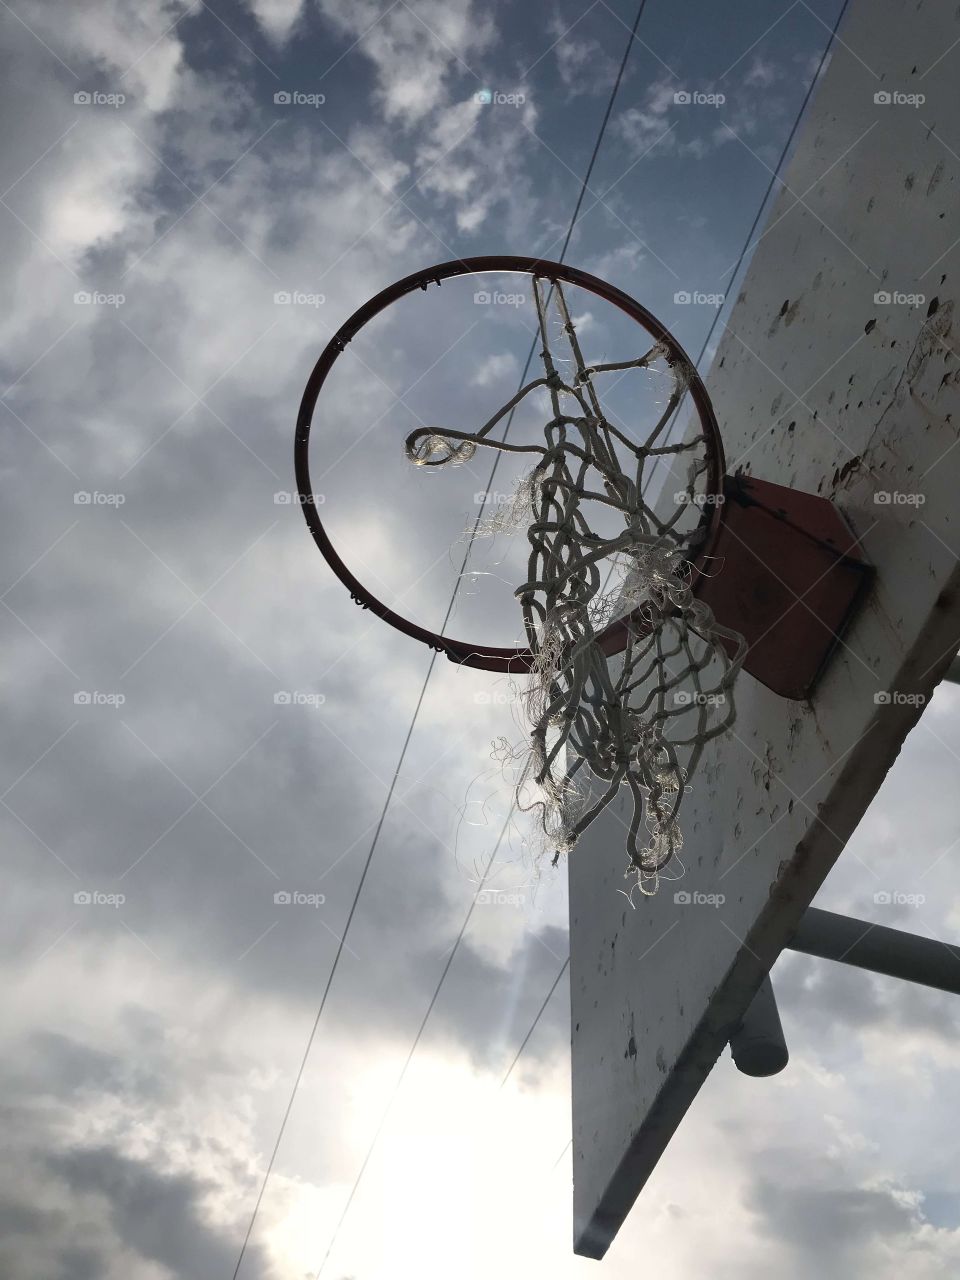 An old basketball hoop being used for something good